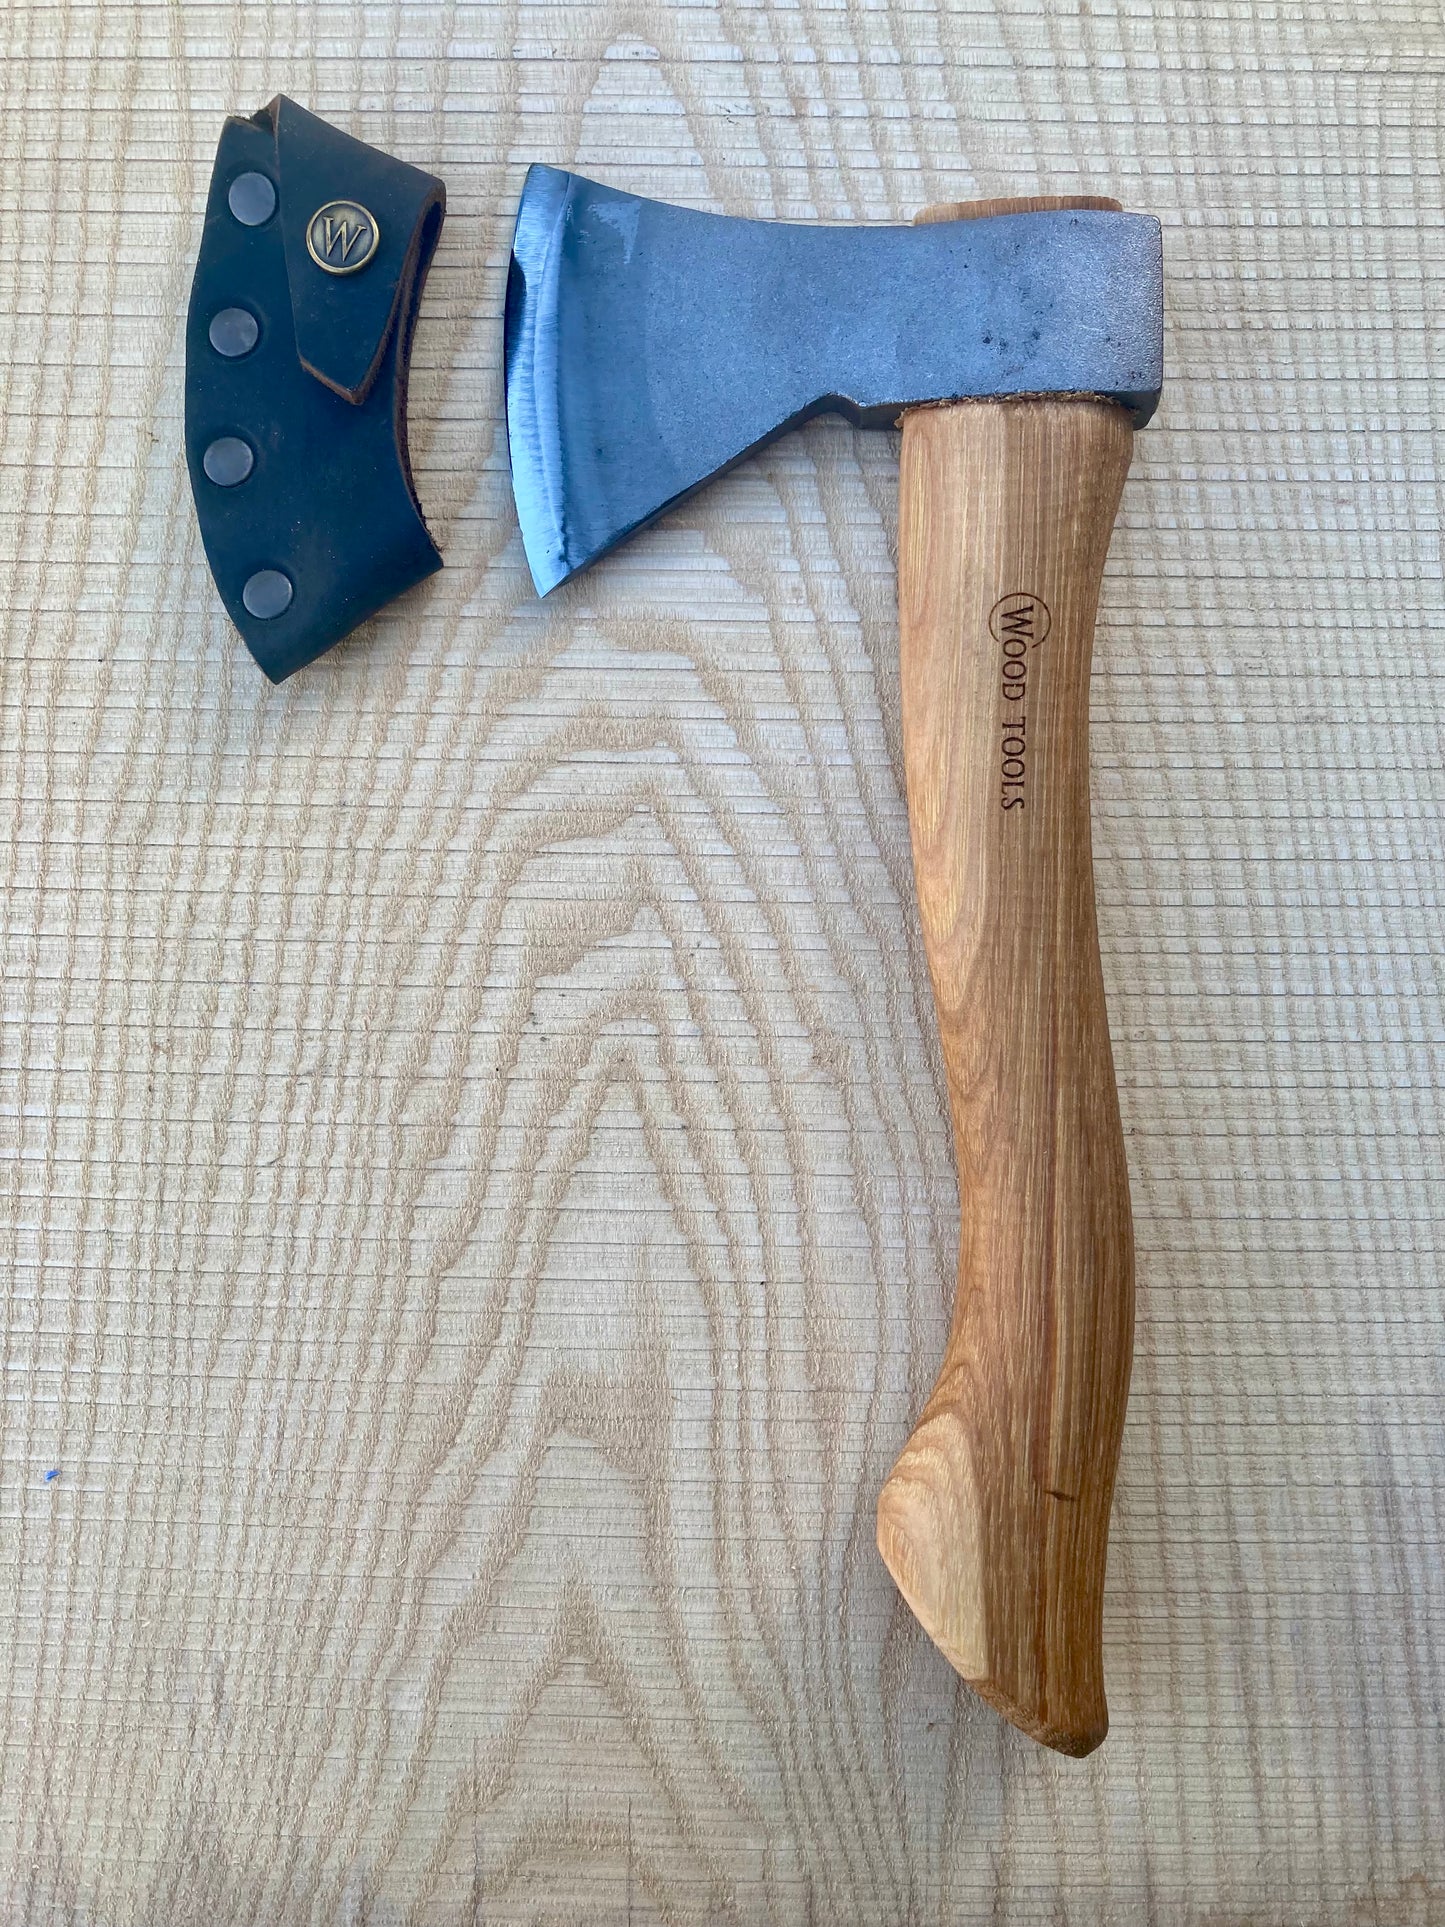 Wood Tools - Large Carving Axe with Sheath